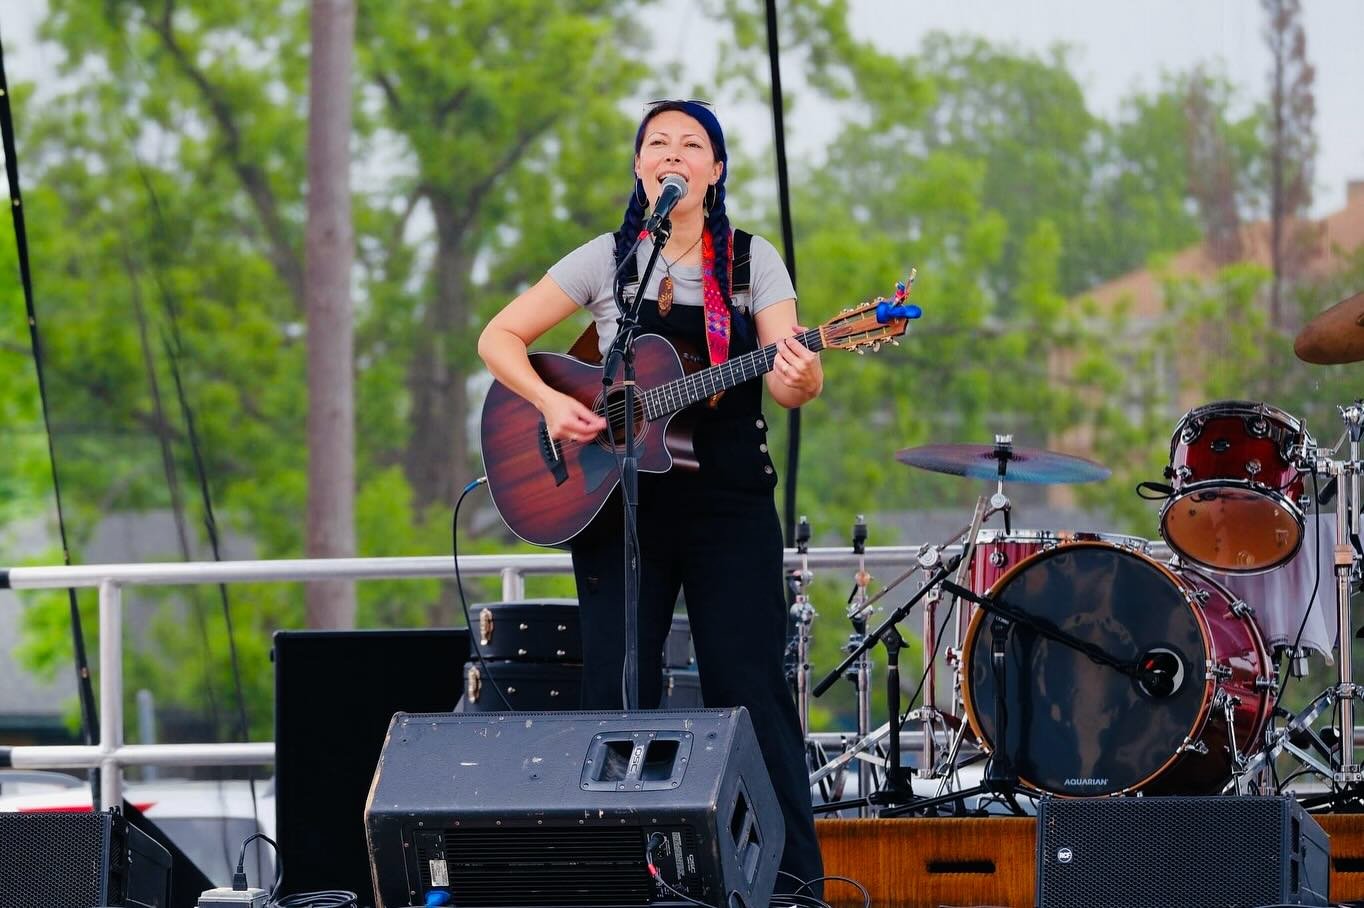 🖤 Eeeeeeek!! Just had the BEST time on the main stage! Thank you to @derrickdayscorsicana for having me and Carey Dean and team for helping it all run smoothly!!! And a HUGE thank you to everyone who came out bright and early to support! I appreciat